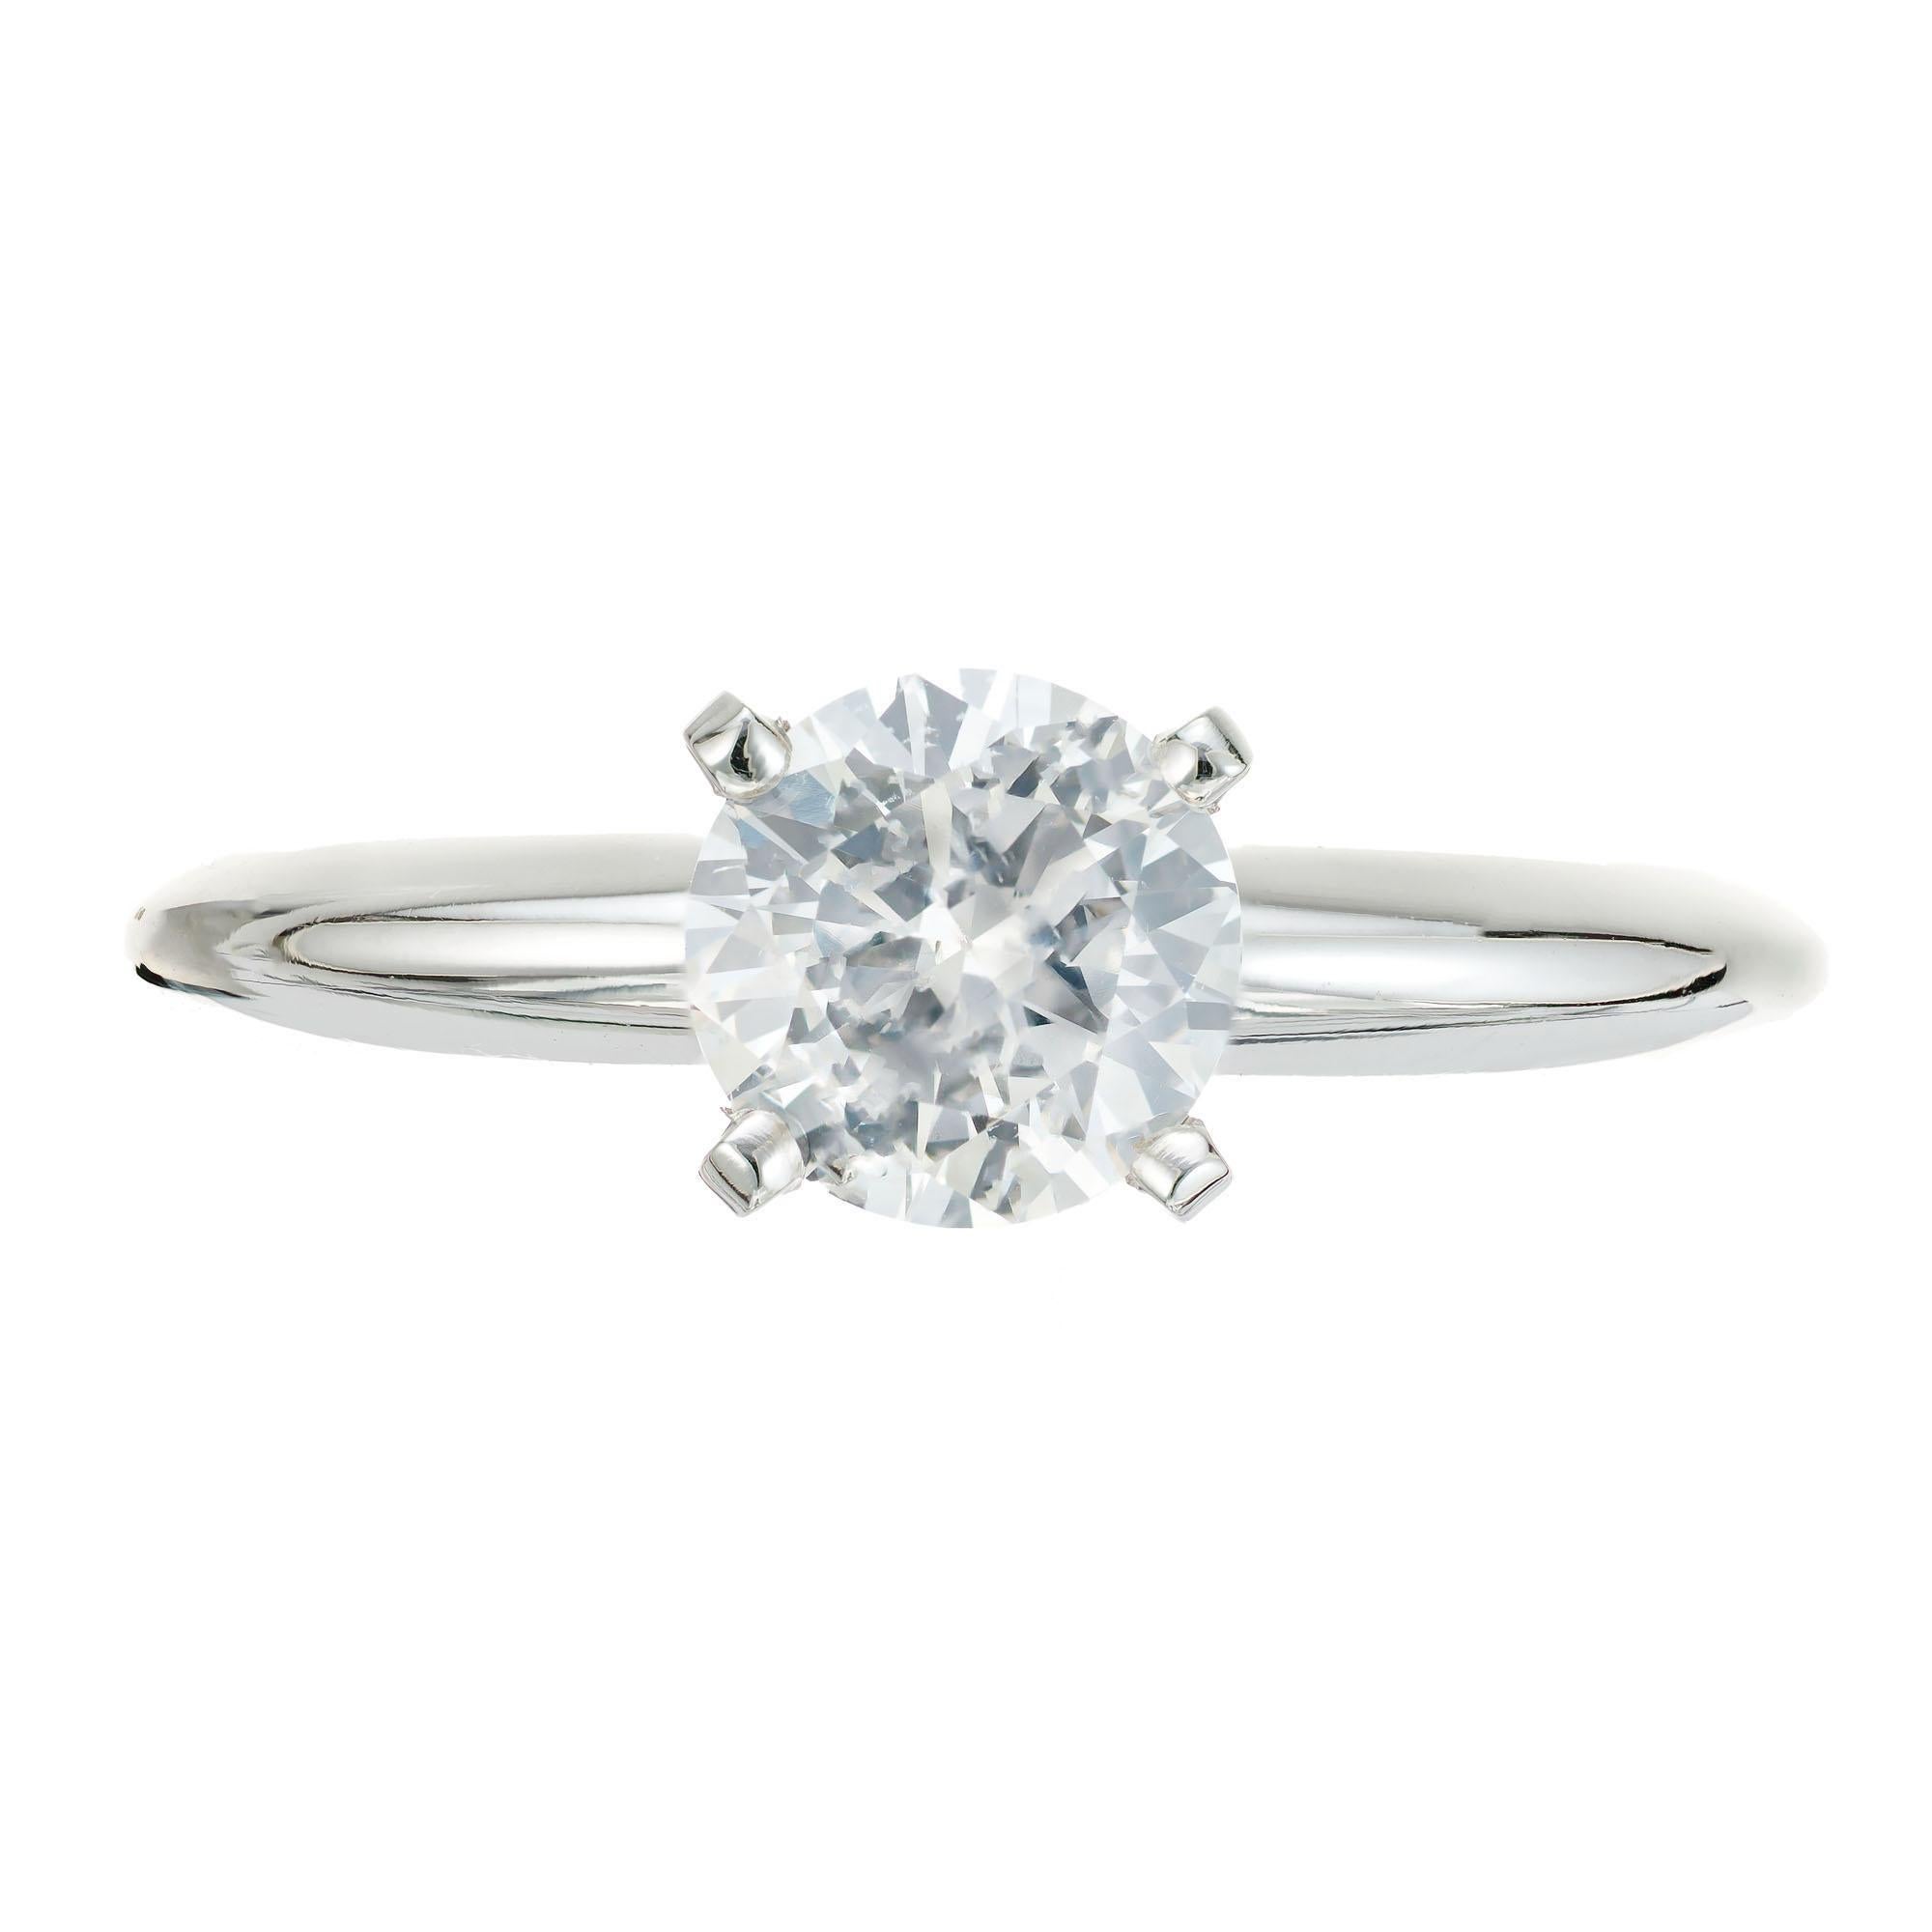 Diamond engagement ring. GIA certified .81 carat transitional cut diamond center stone, set in a 4 prong 14k white gold solitaire setting. The diamond is circa 1940's and has extra brilliance because of the 1940's cutting.  Designed and crafted in